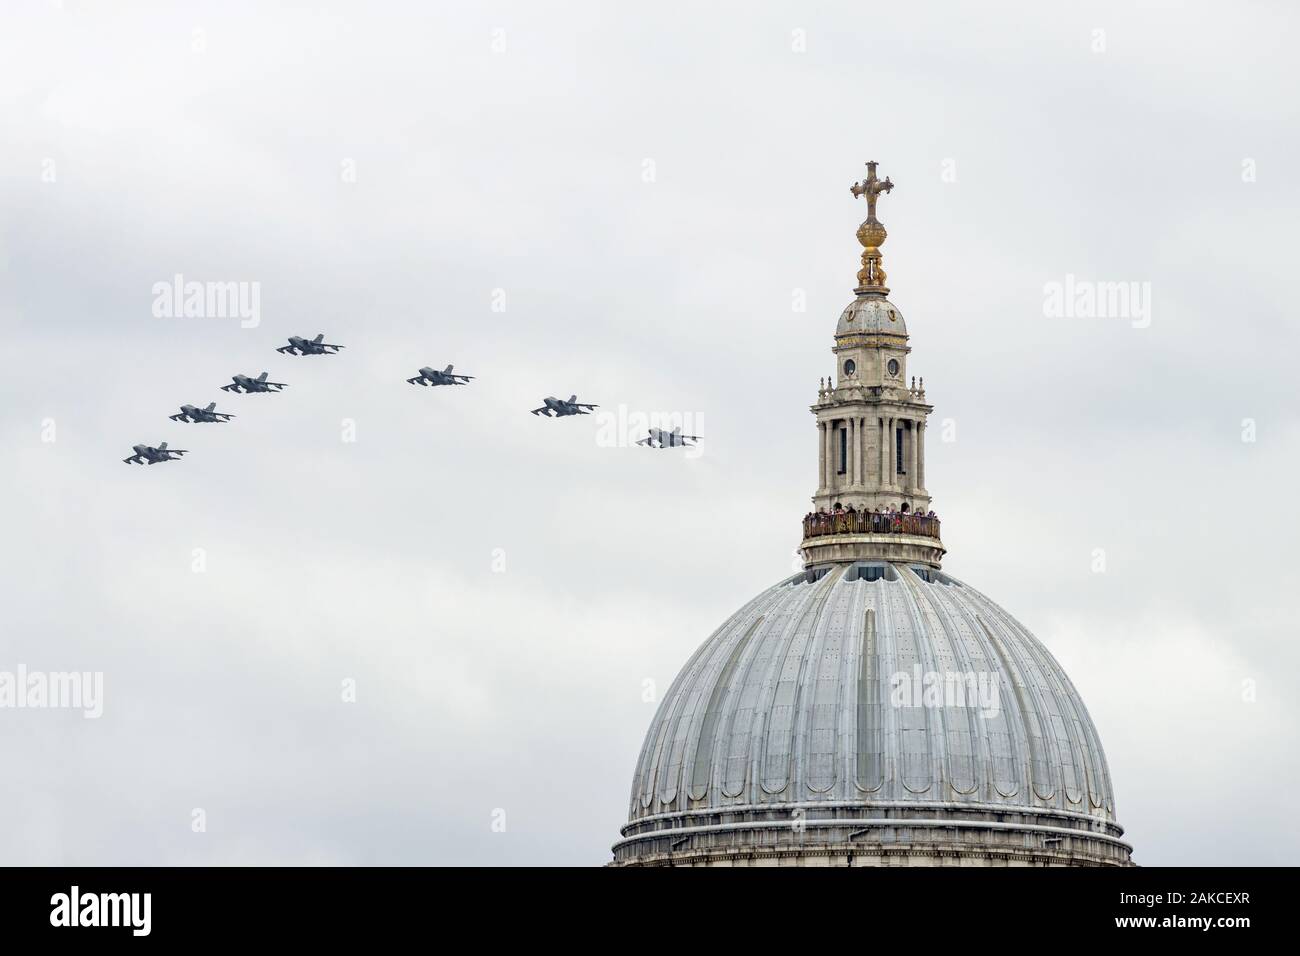 RAF Tornado GR4 in display formation flying on the RAF 100th anniversary, London, UK Stock Photo